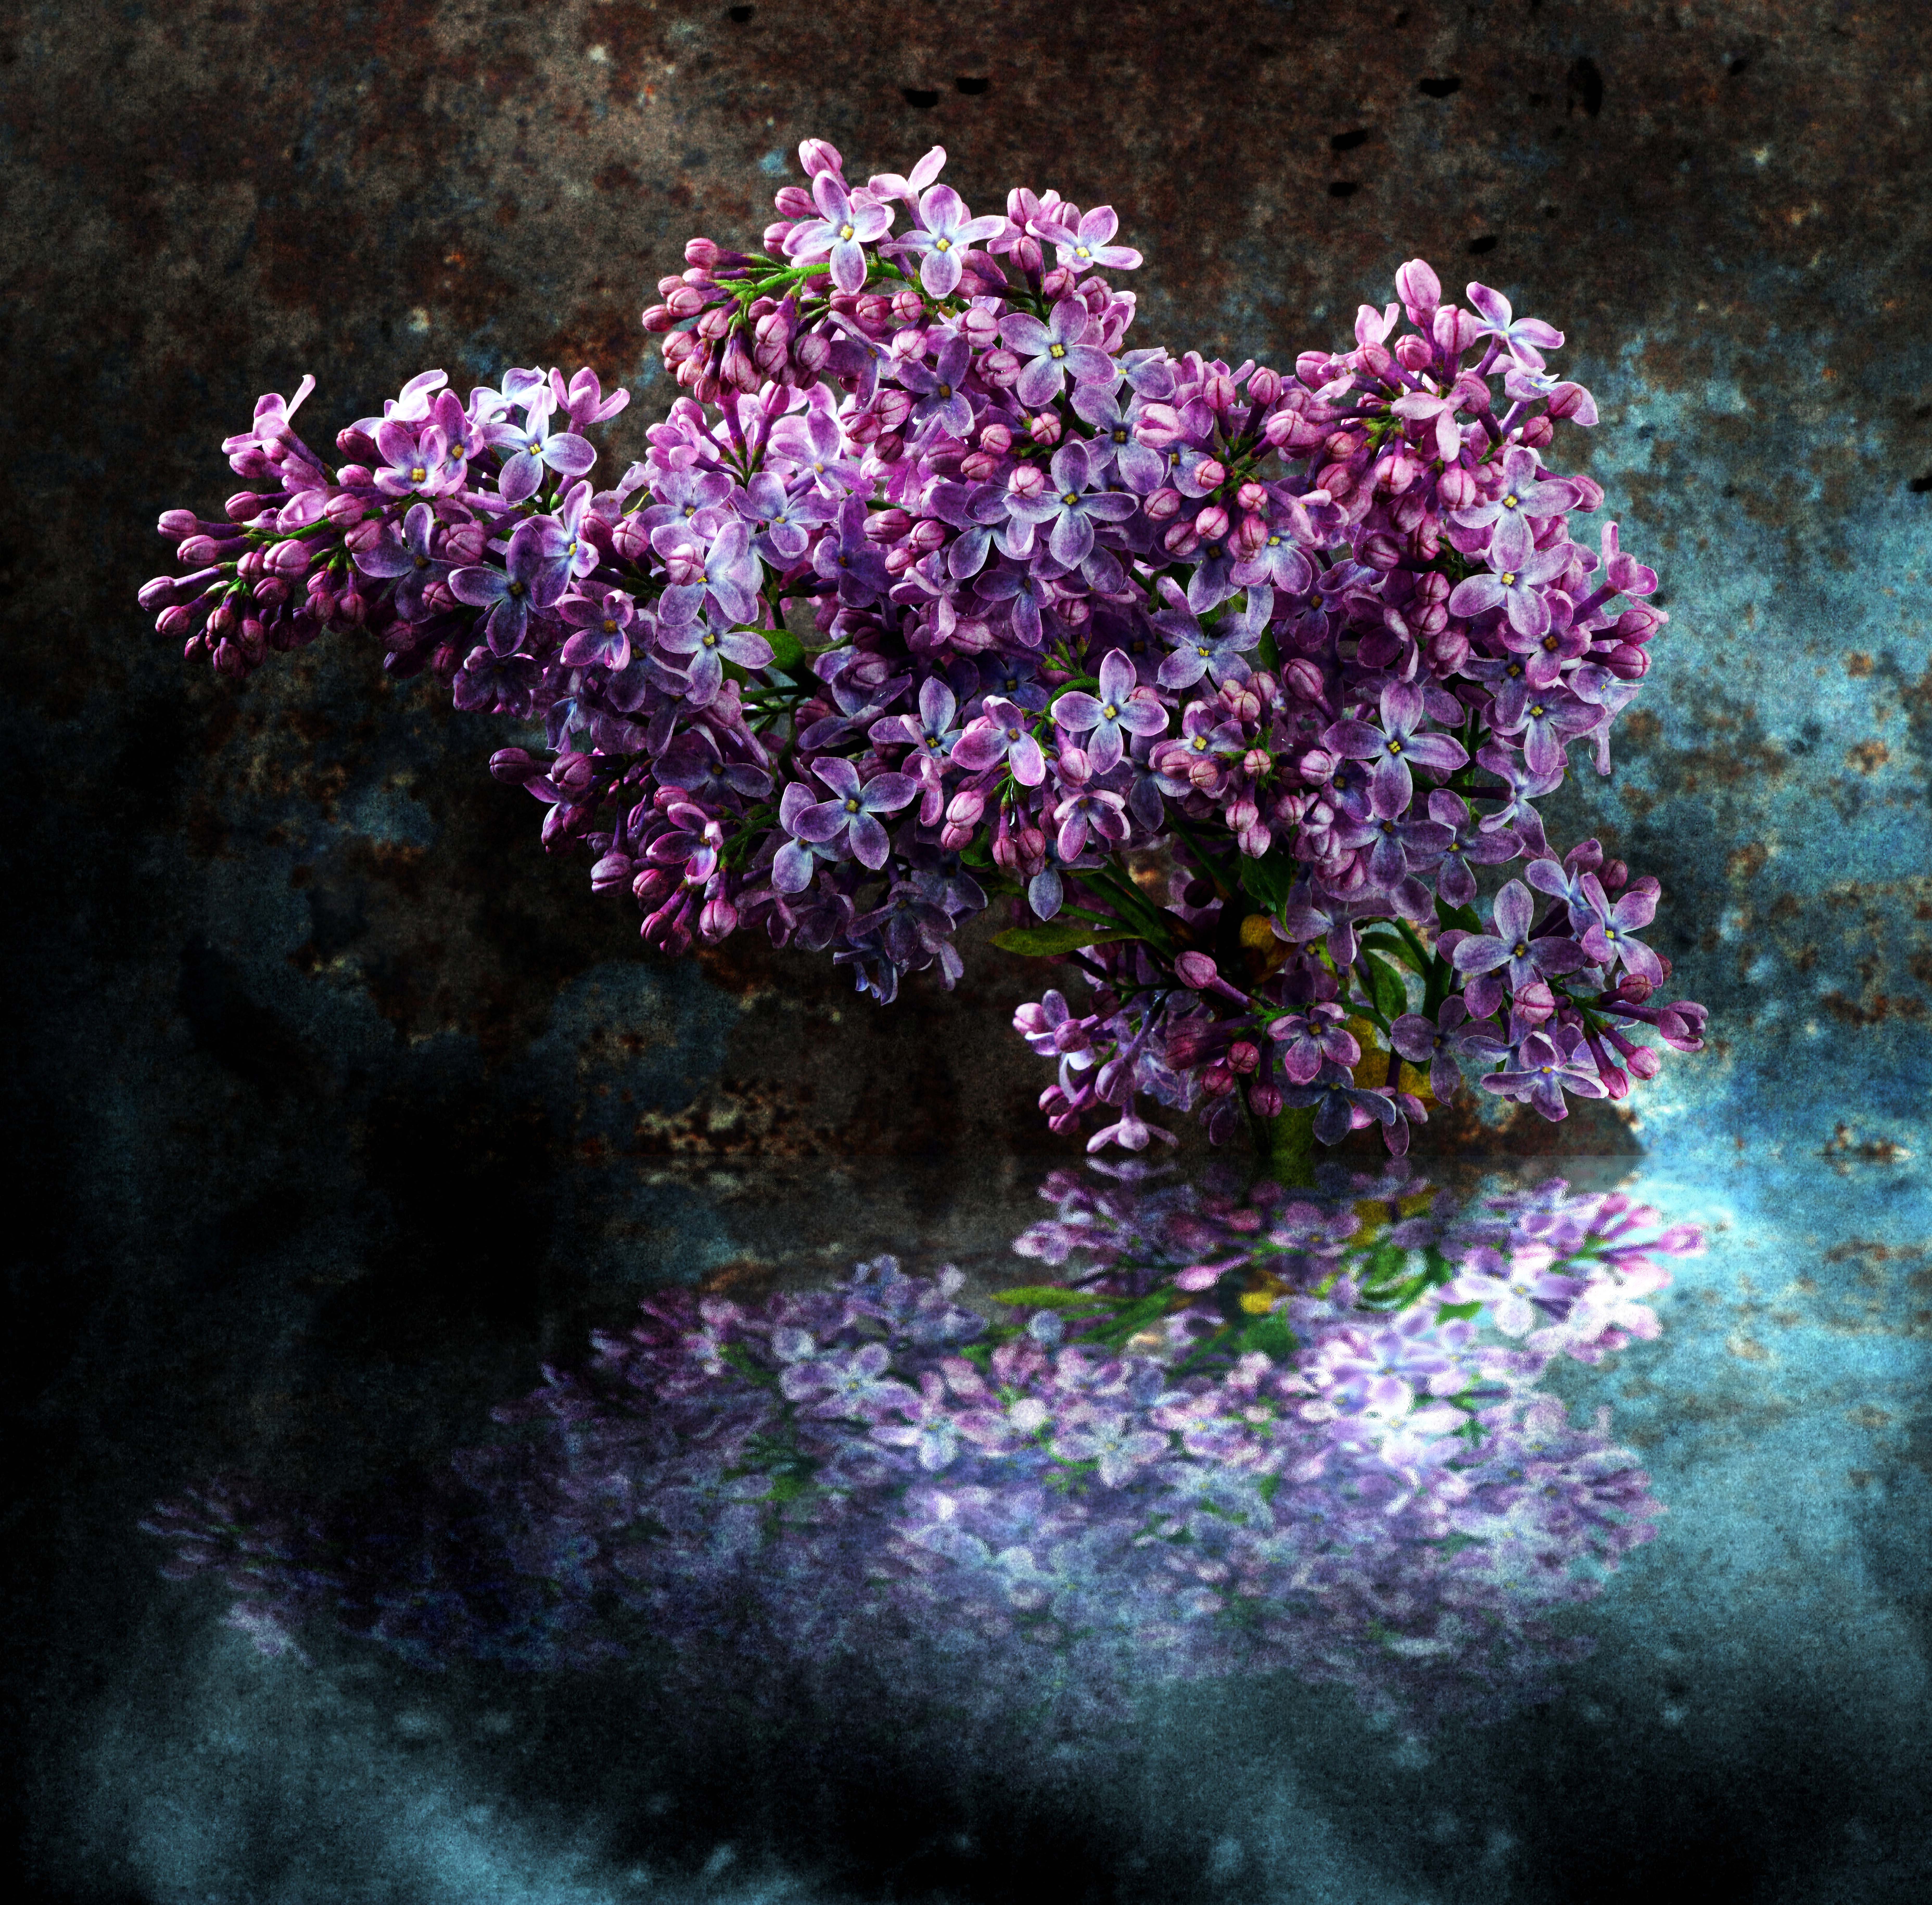 A sprig of lilac from the garden, with reflections.